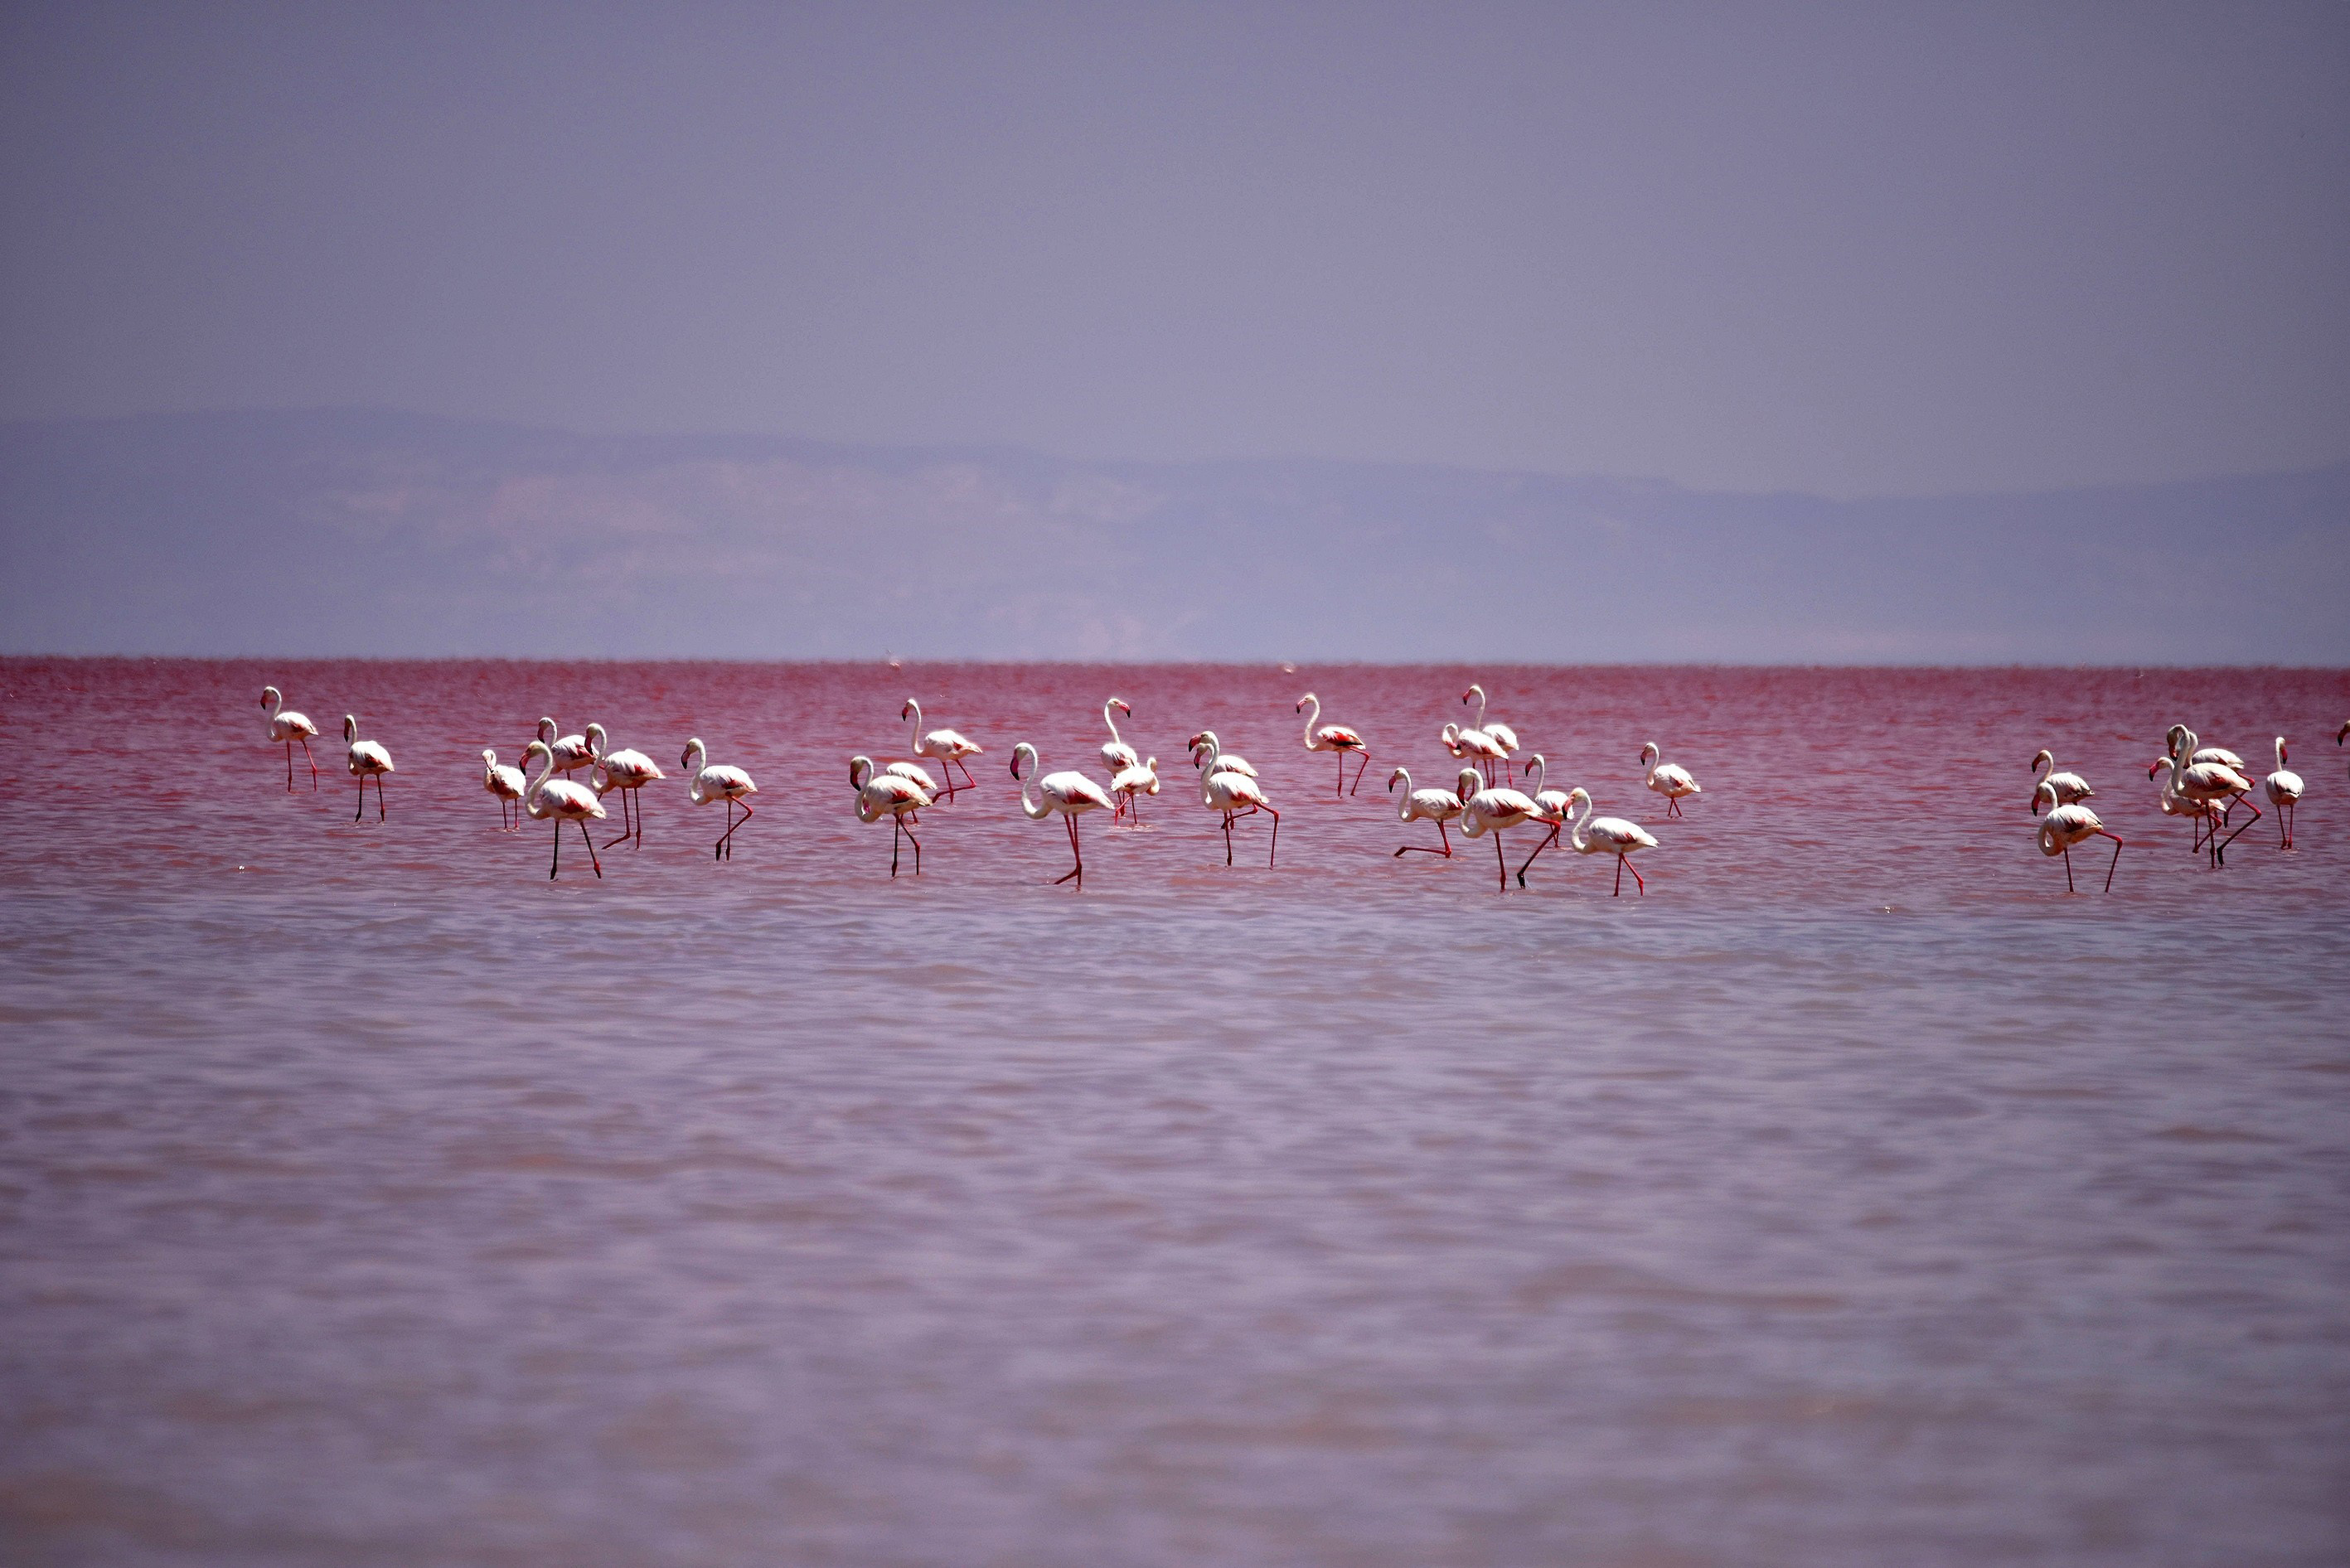 Flamingos are seen at the  Salt Lake  in Aksaray, Turkey on July 16, 2015.